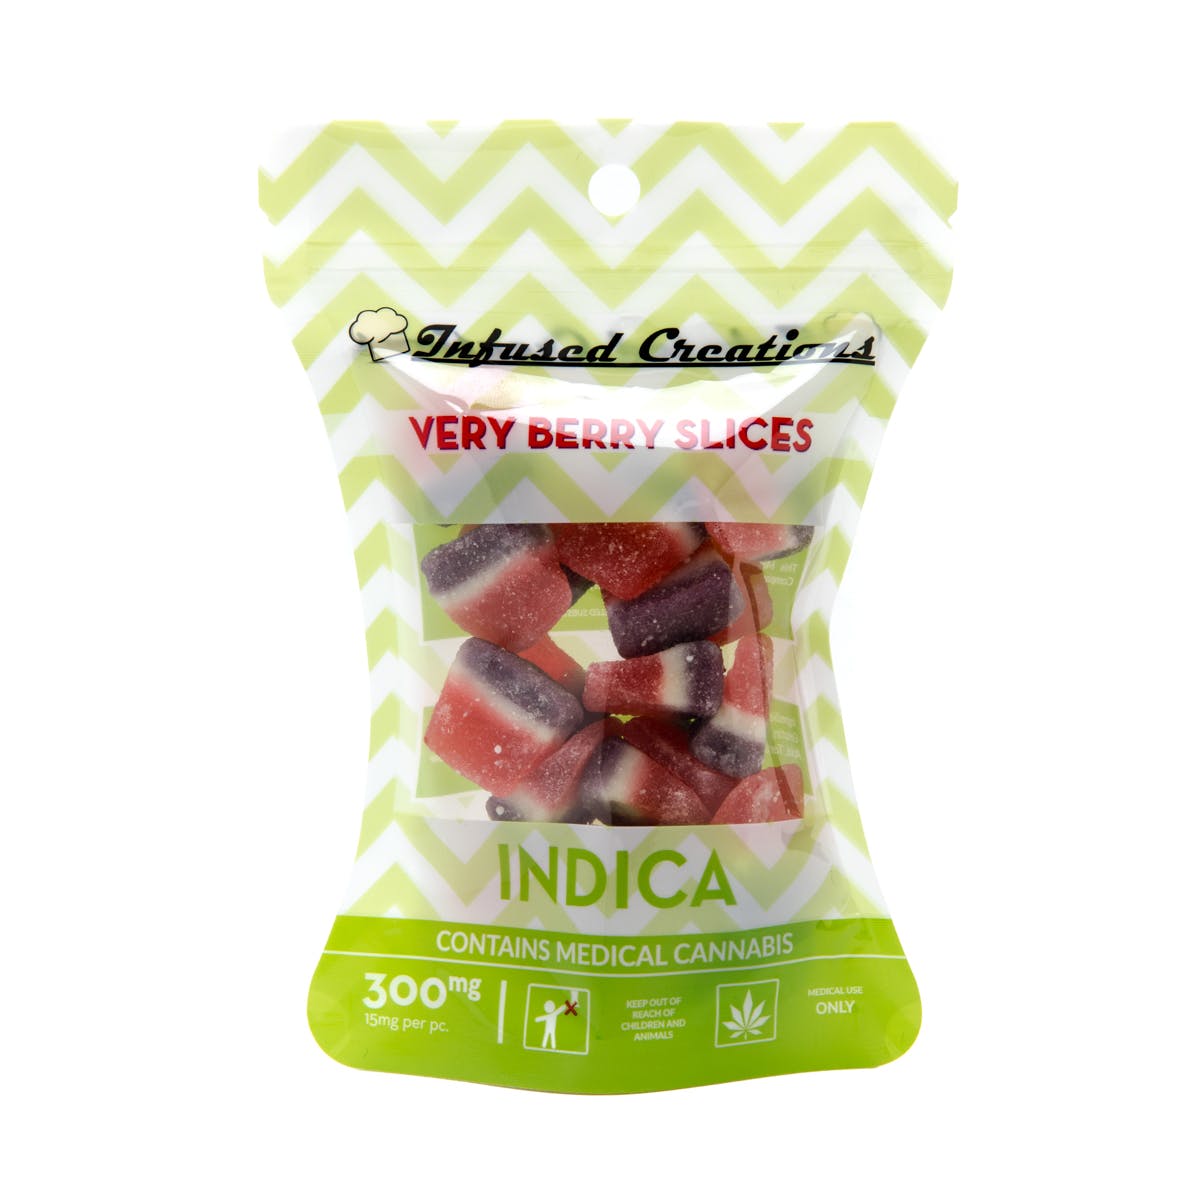 Very Berry Slices Indica, 300mg